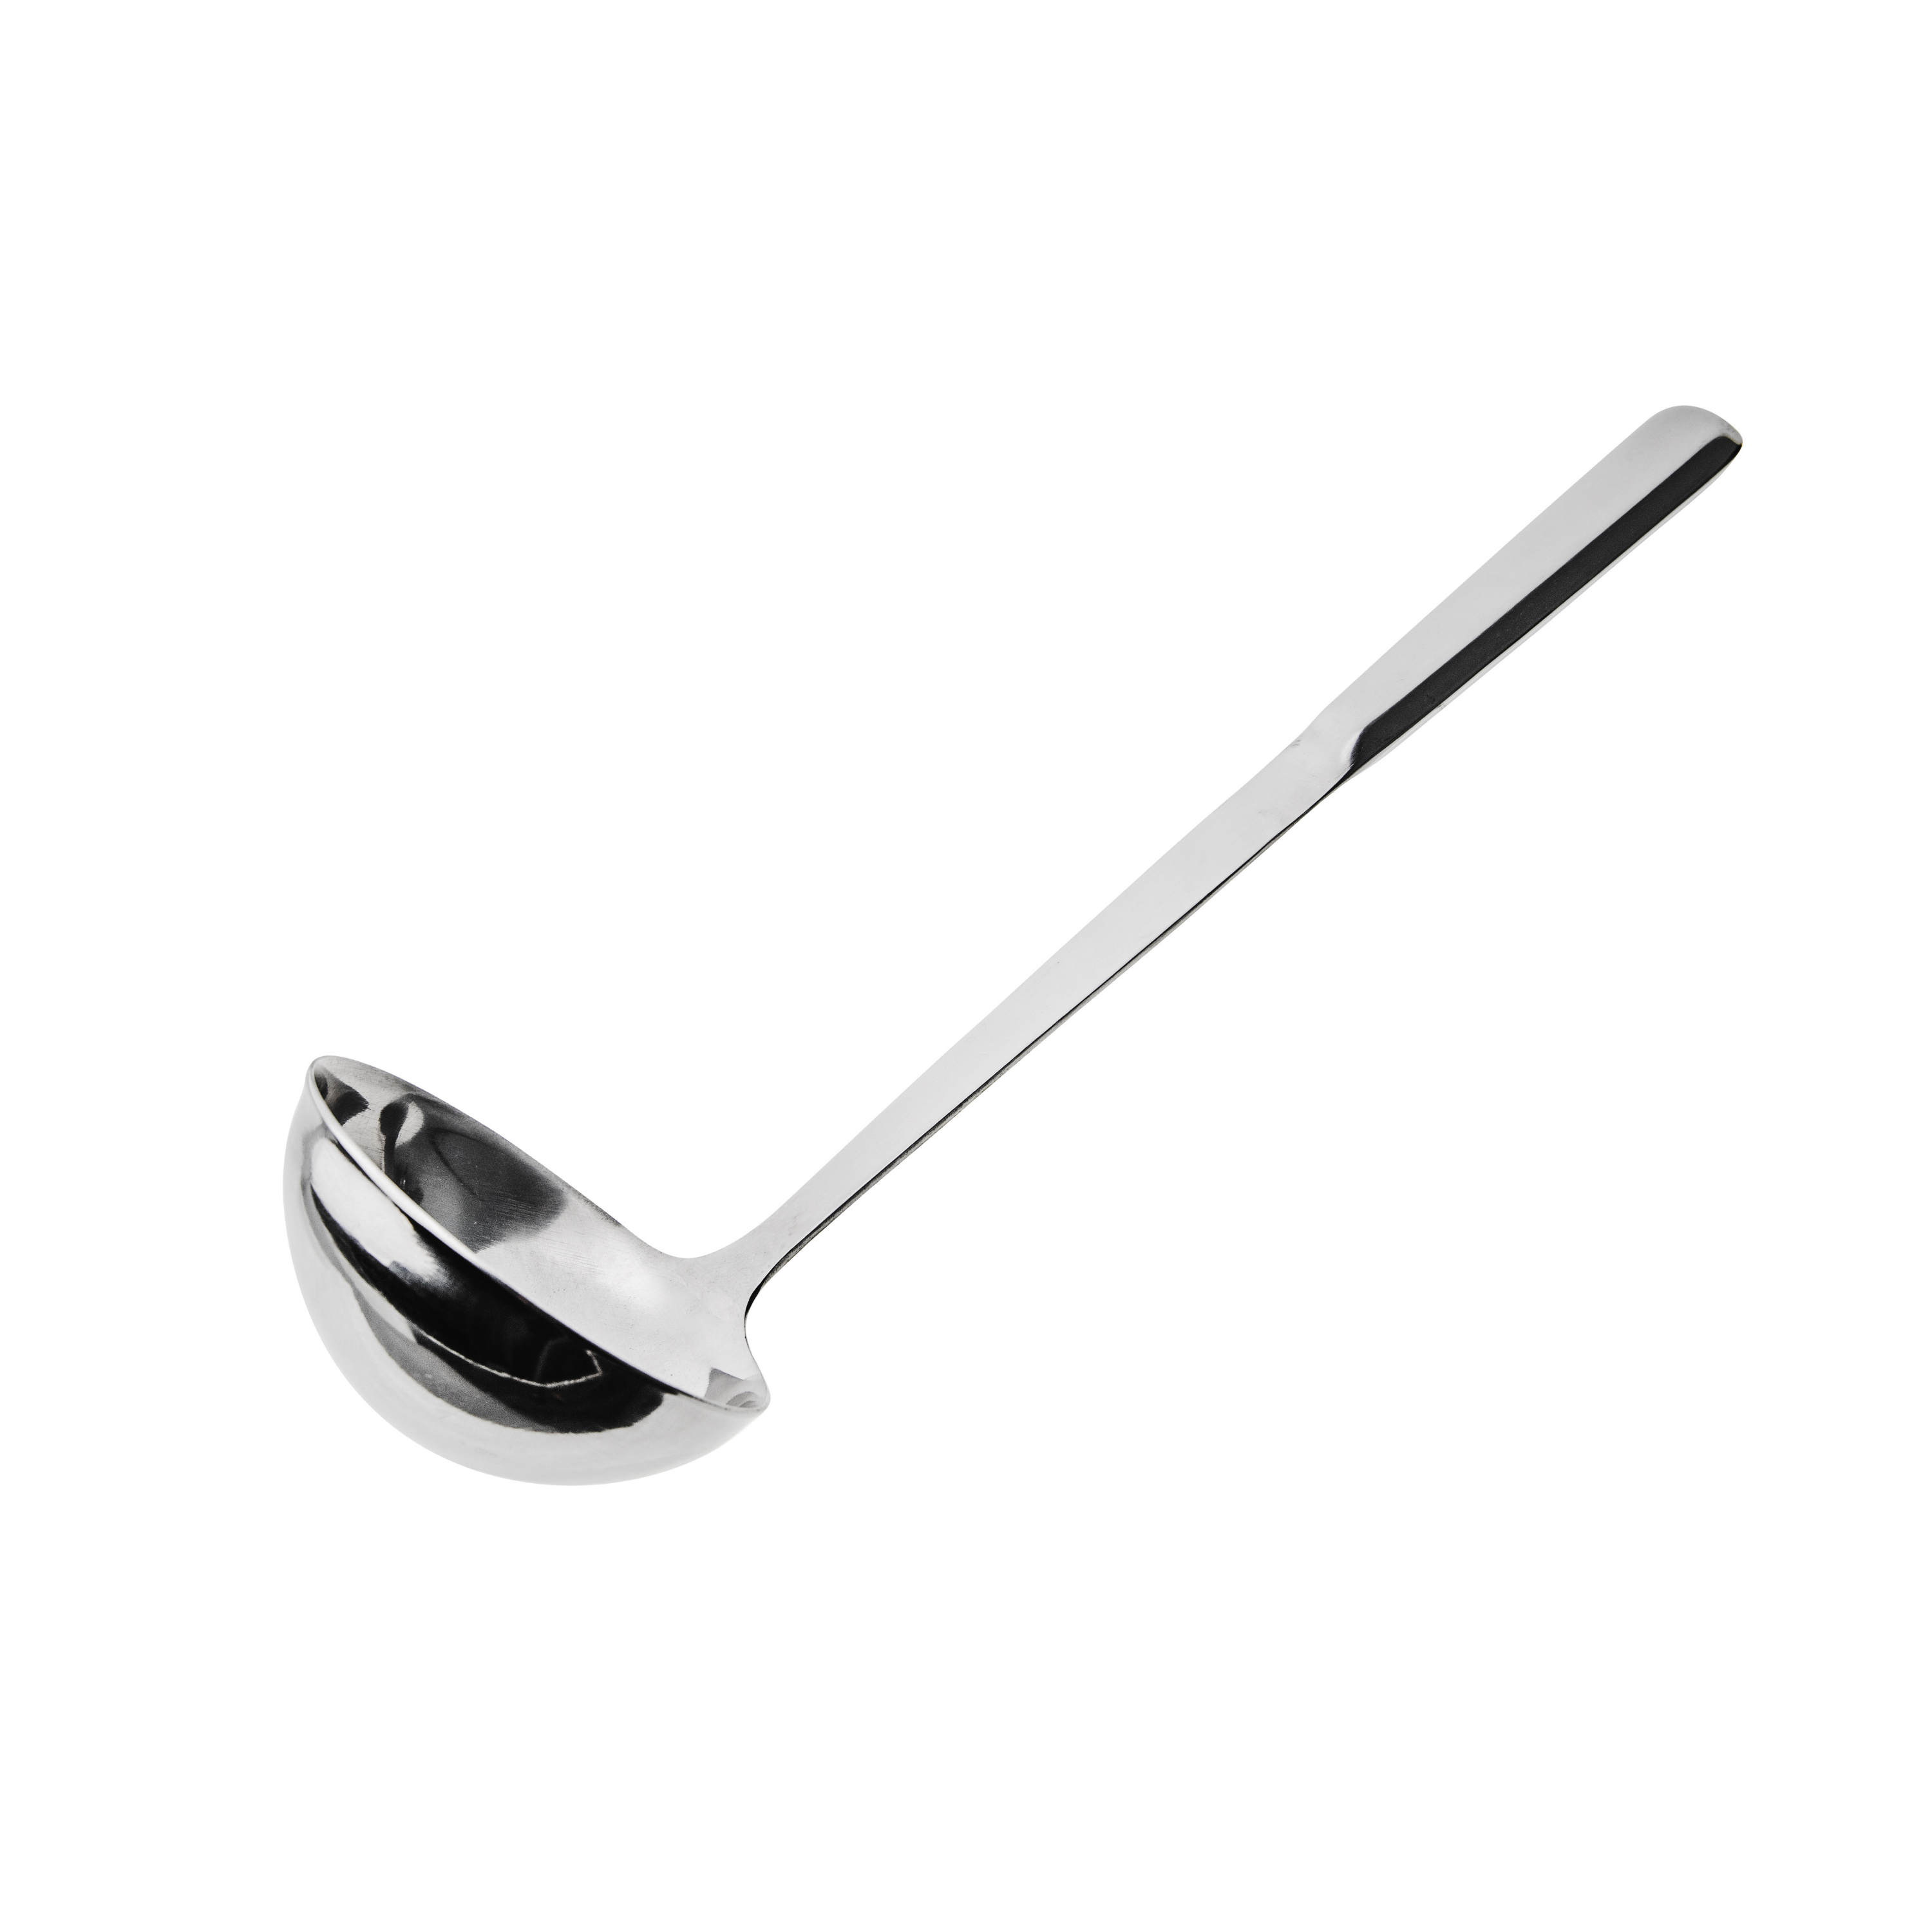 [Set of 4] Stainless Steel Soup Ladle - 4oz, 6oz, 8oz, 12oz One-Piece Sauce  Spatula with Hook Handles, Commercial Grade Serving Spoon, Kitchen Tool